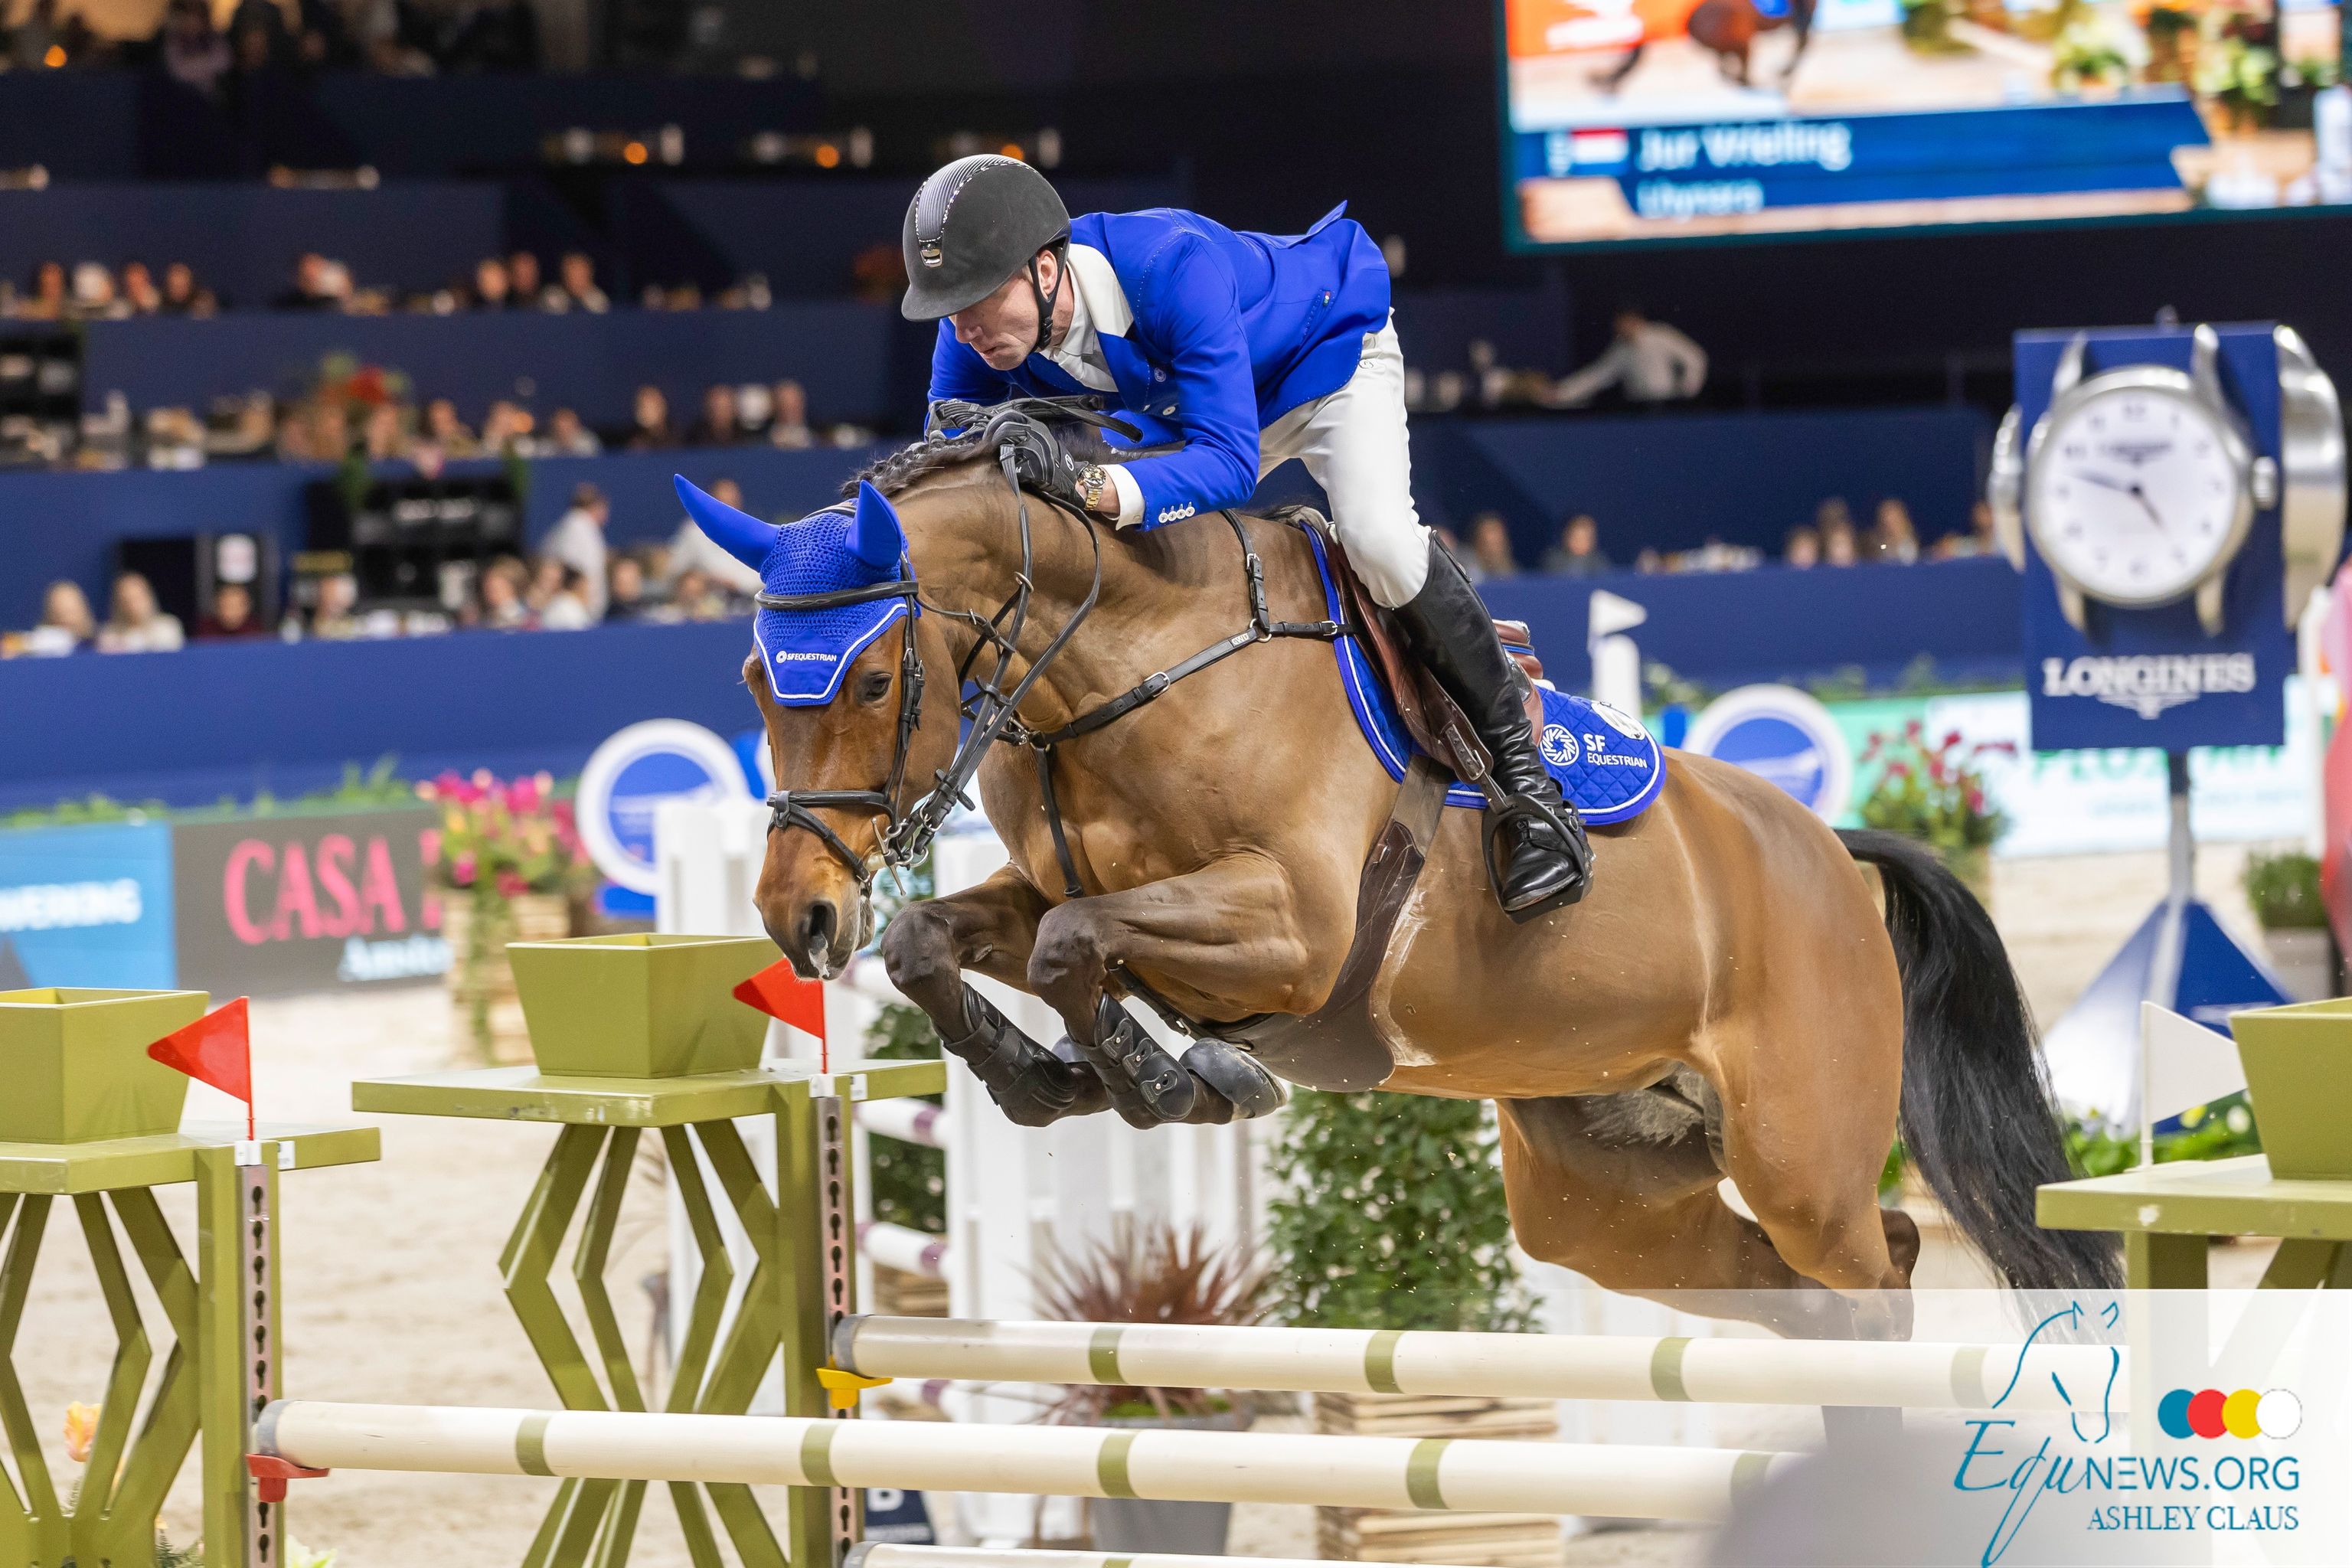 Jur Vrieling says goodbye to another prospect: Lhynara sold to American Young Rider